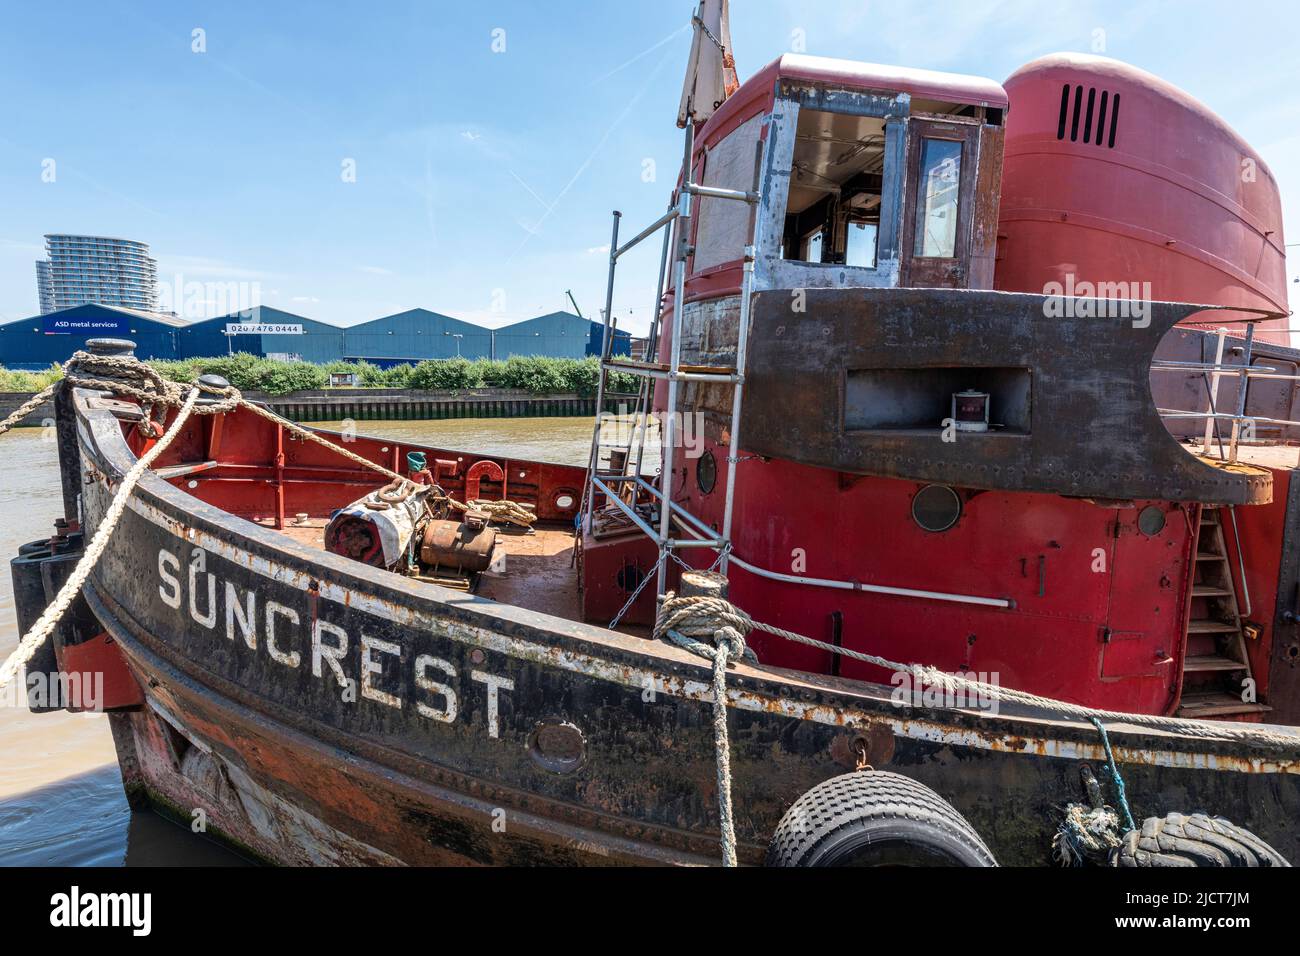 Suncrest, a disused Tug boat moored at Trinity Bouy Wharf, East London. Stock Photo